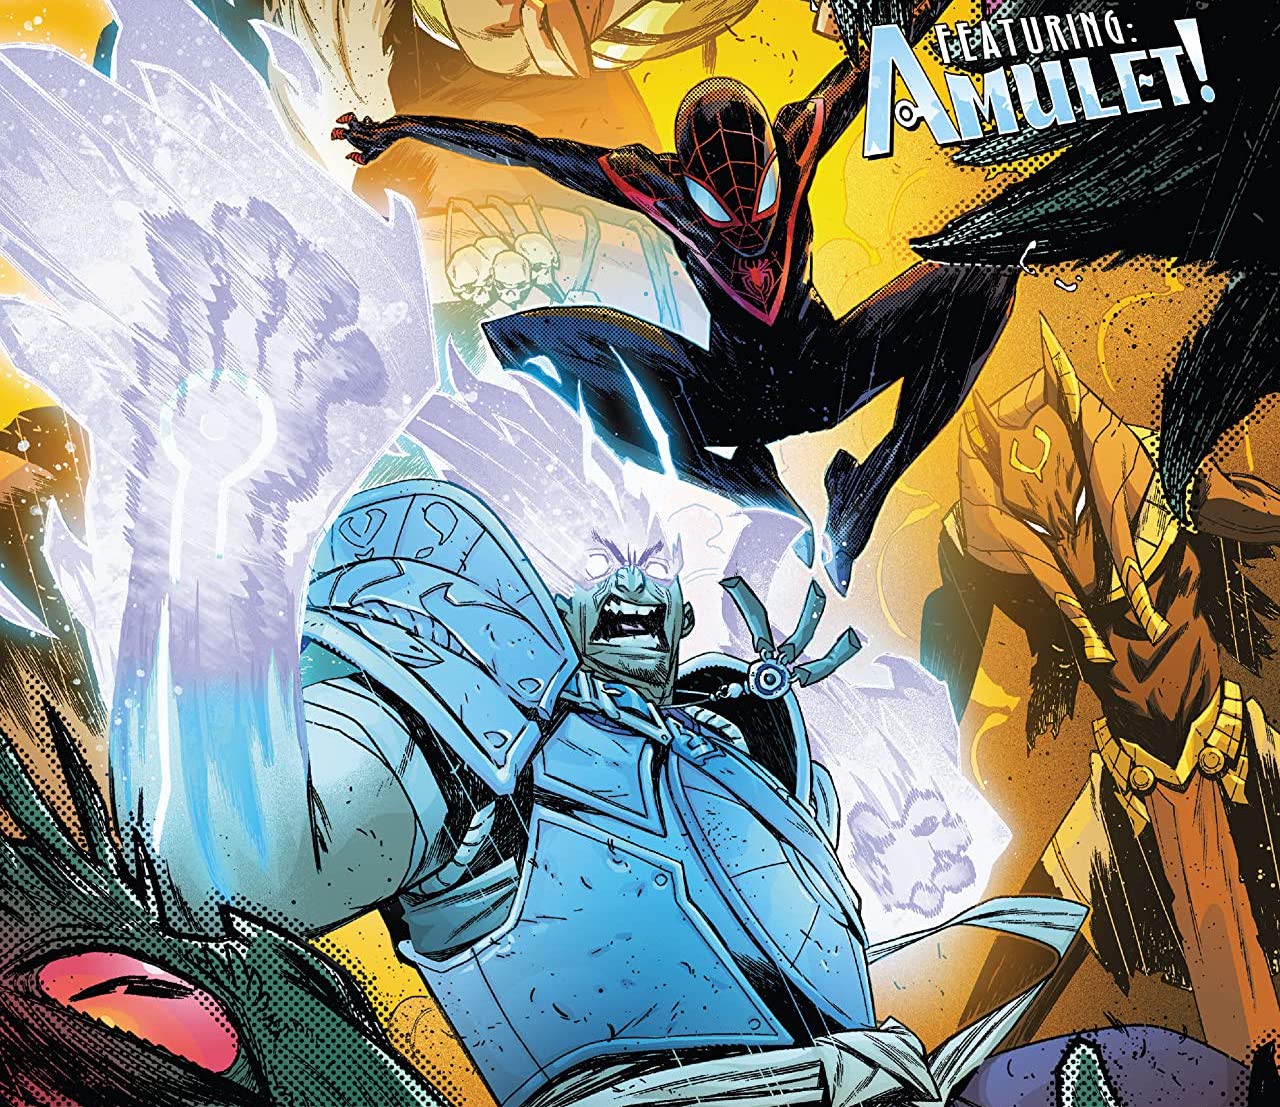 'Miles Morales: Spider-Man Annual' #1 further proves Amulet needs his own series